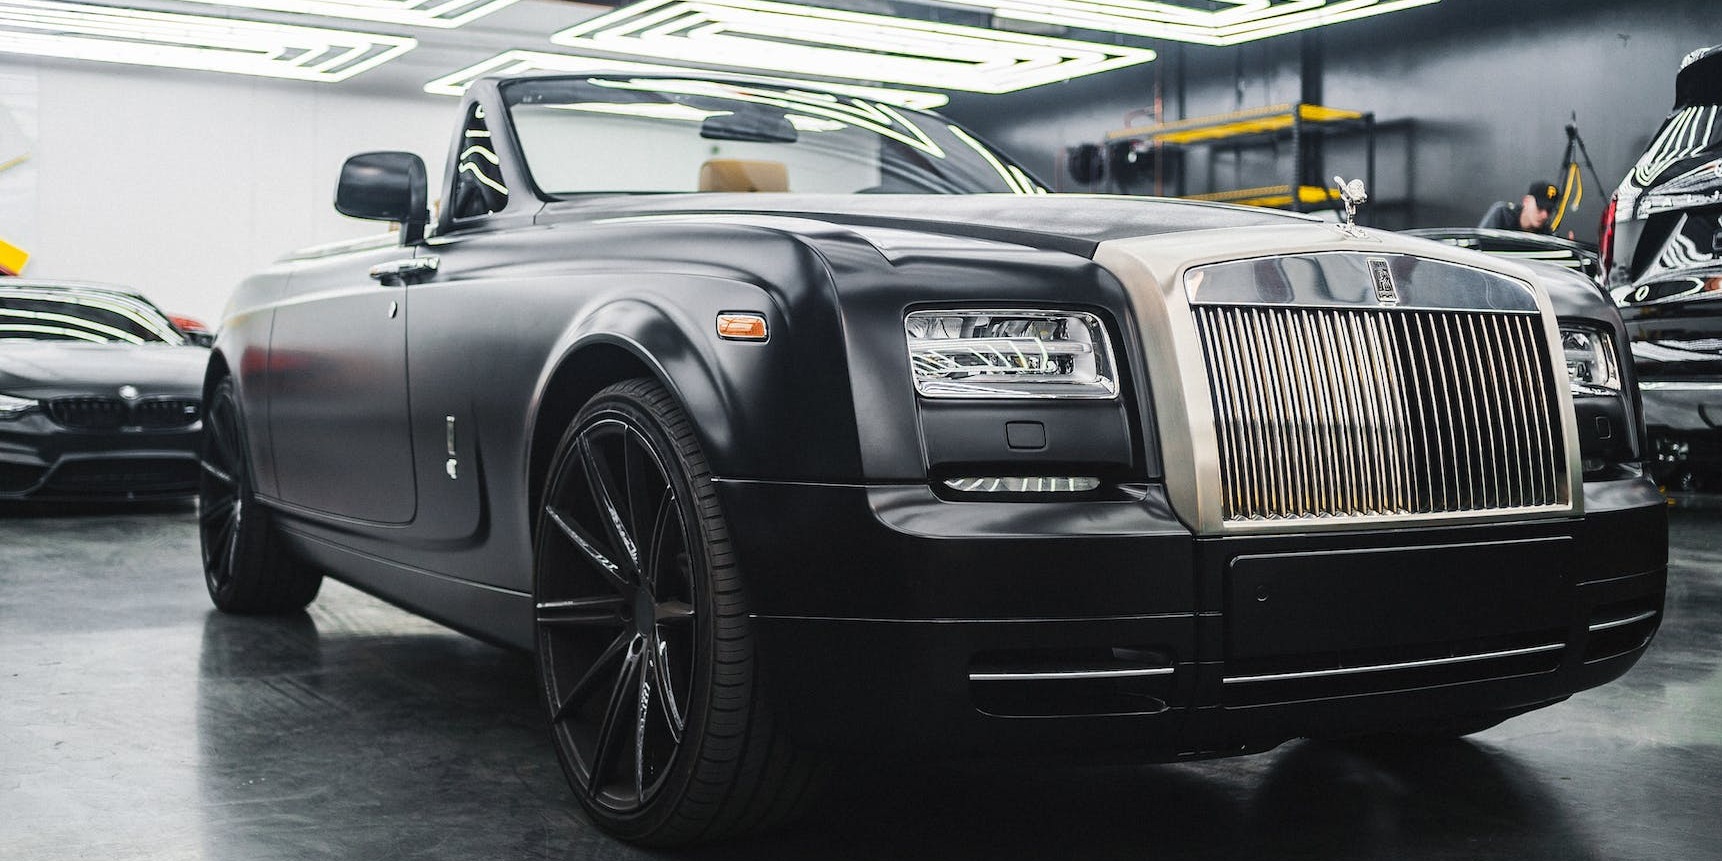 Comparing the Comfort and Style of Rolls Royce: A Review for Prospective Hires in Birmingham